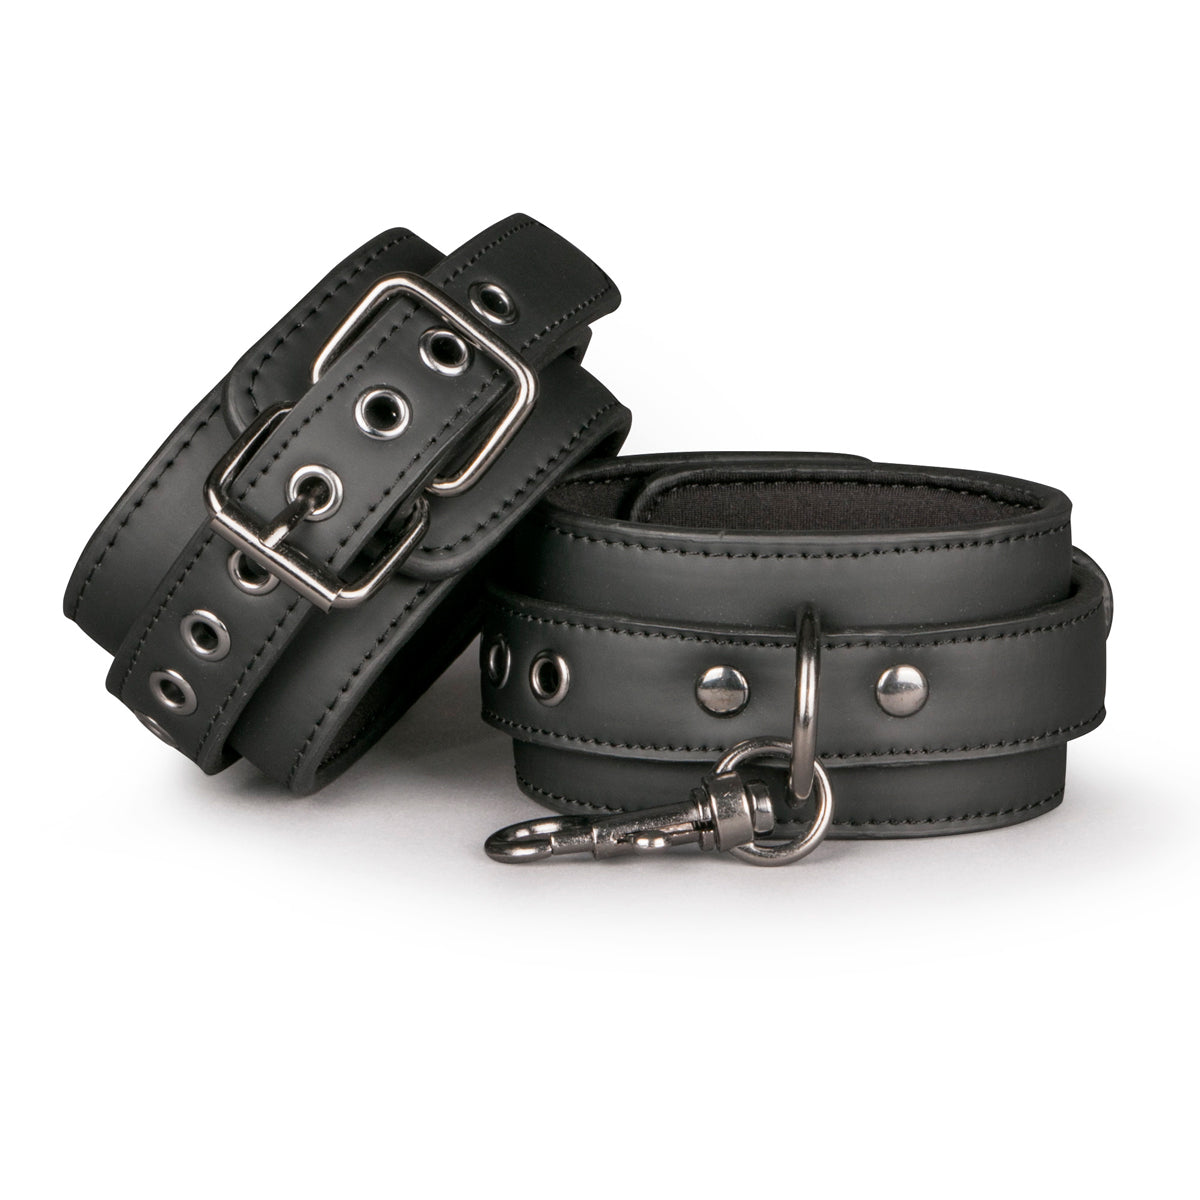 Ankle Cuffs Black - Just for you desires